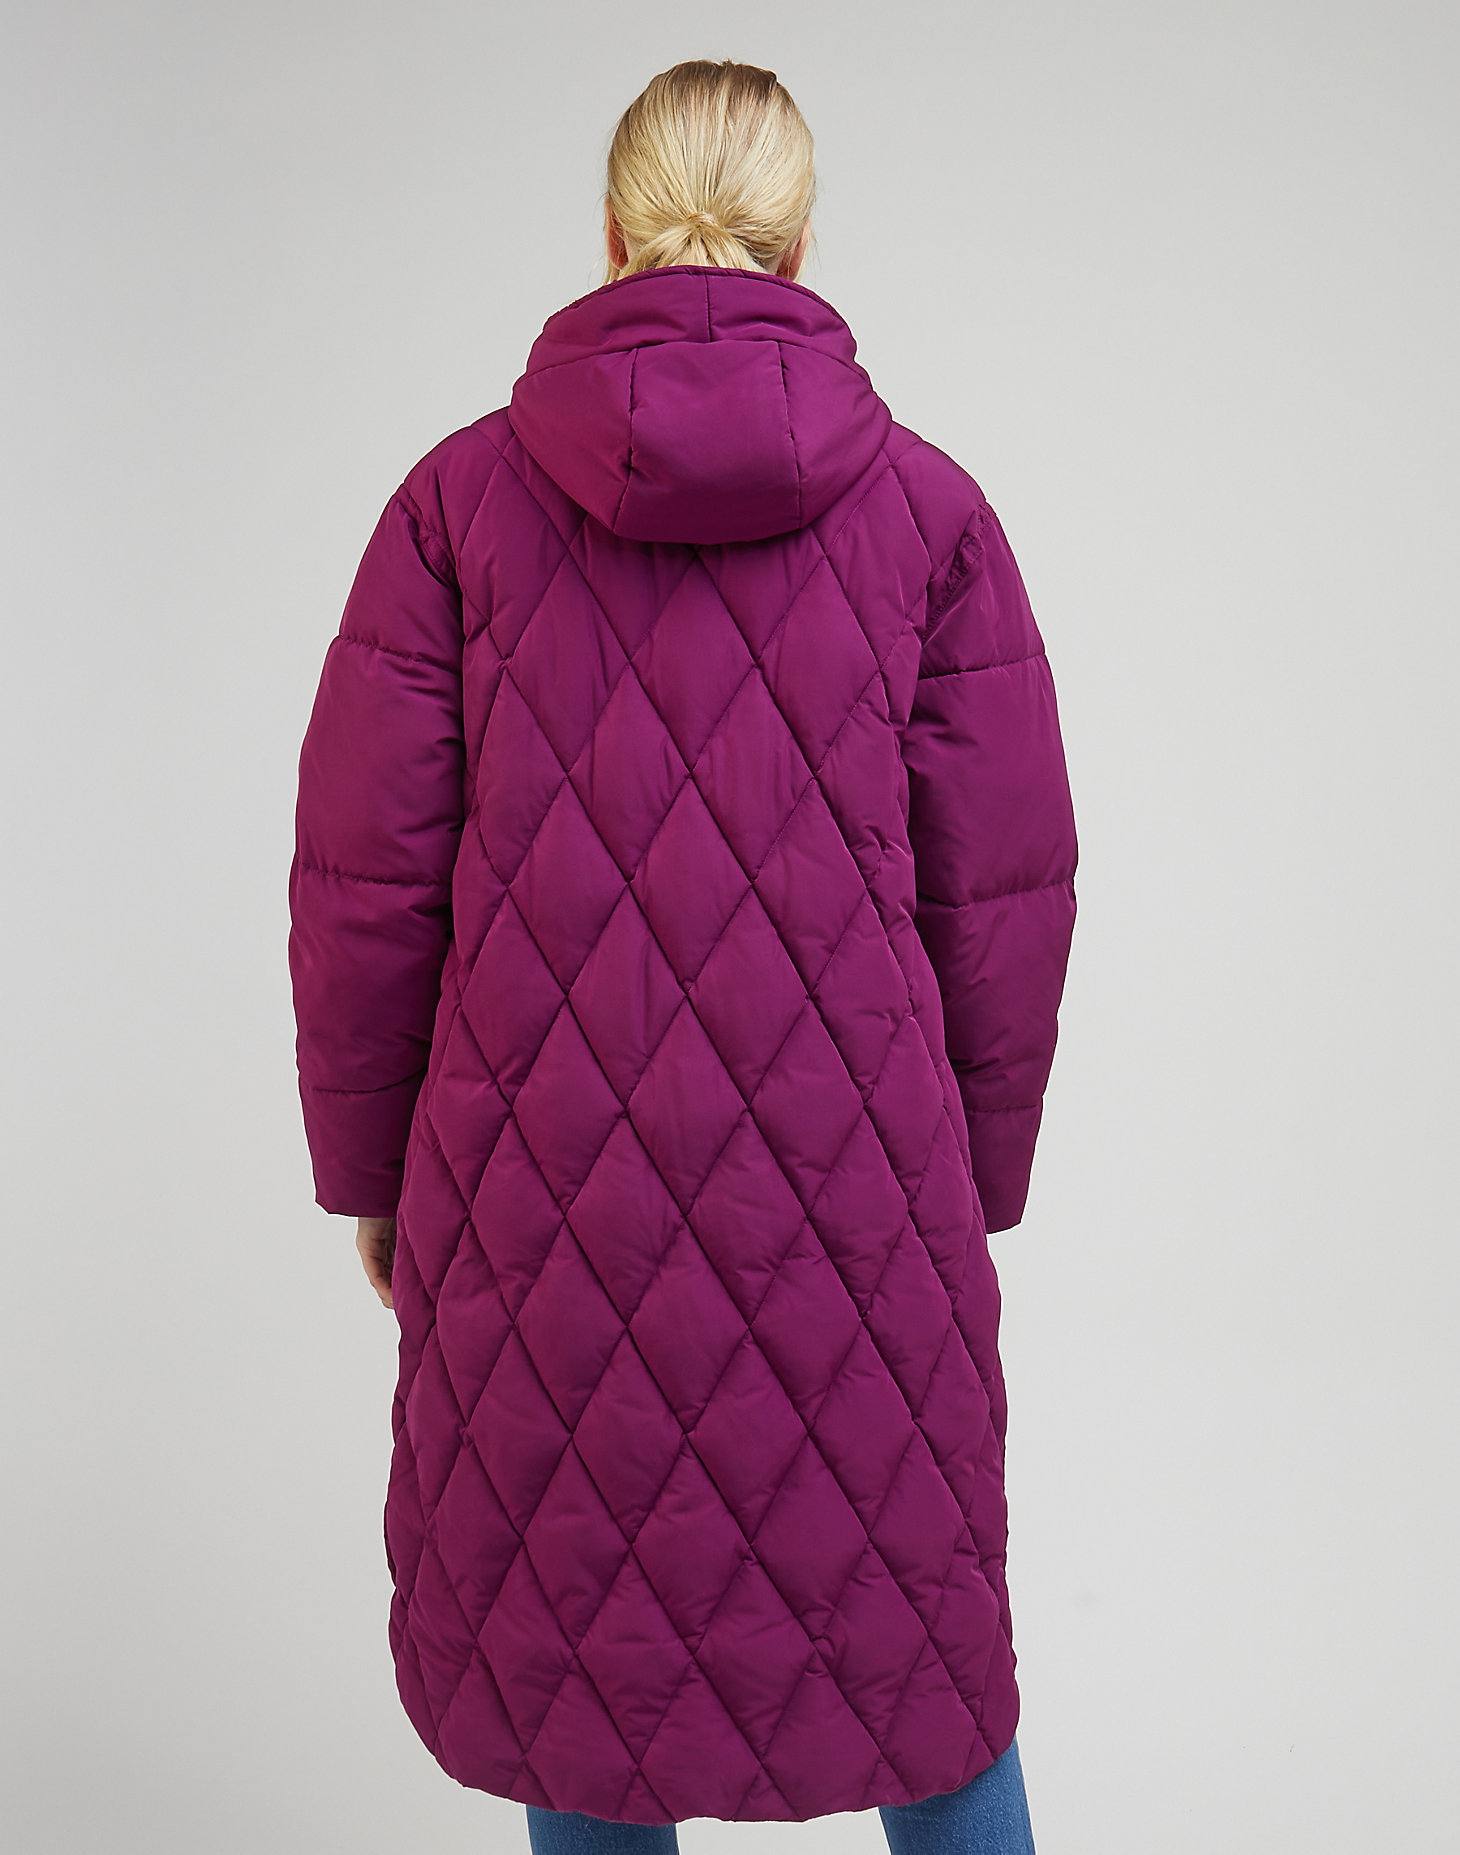 Long Puffer in Foxy Violet alternative view 1